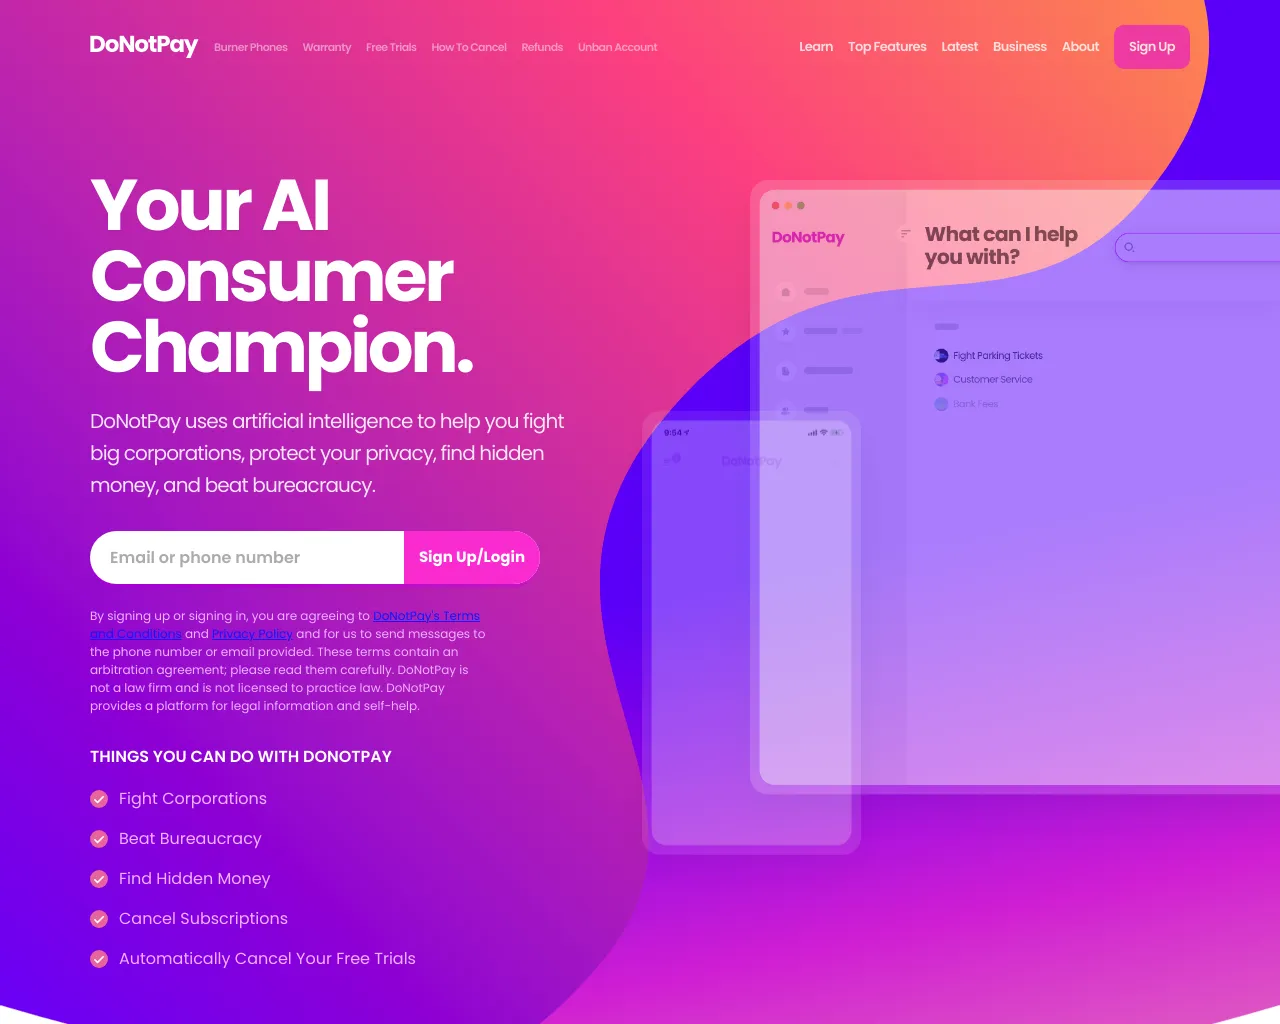 DoNotPay - Your AI Consumer Champion